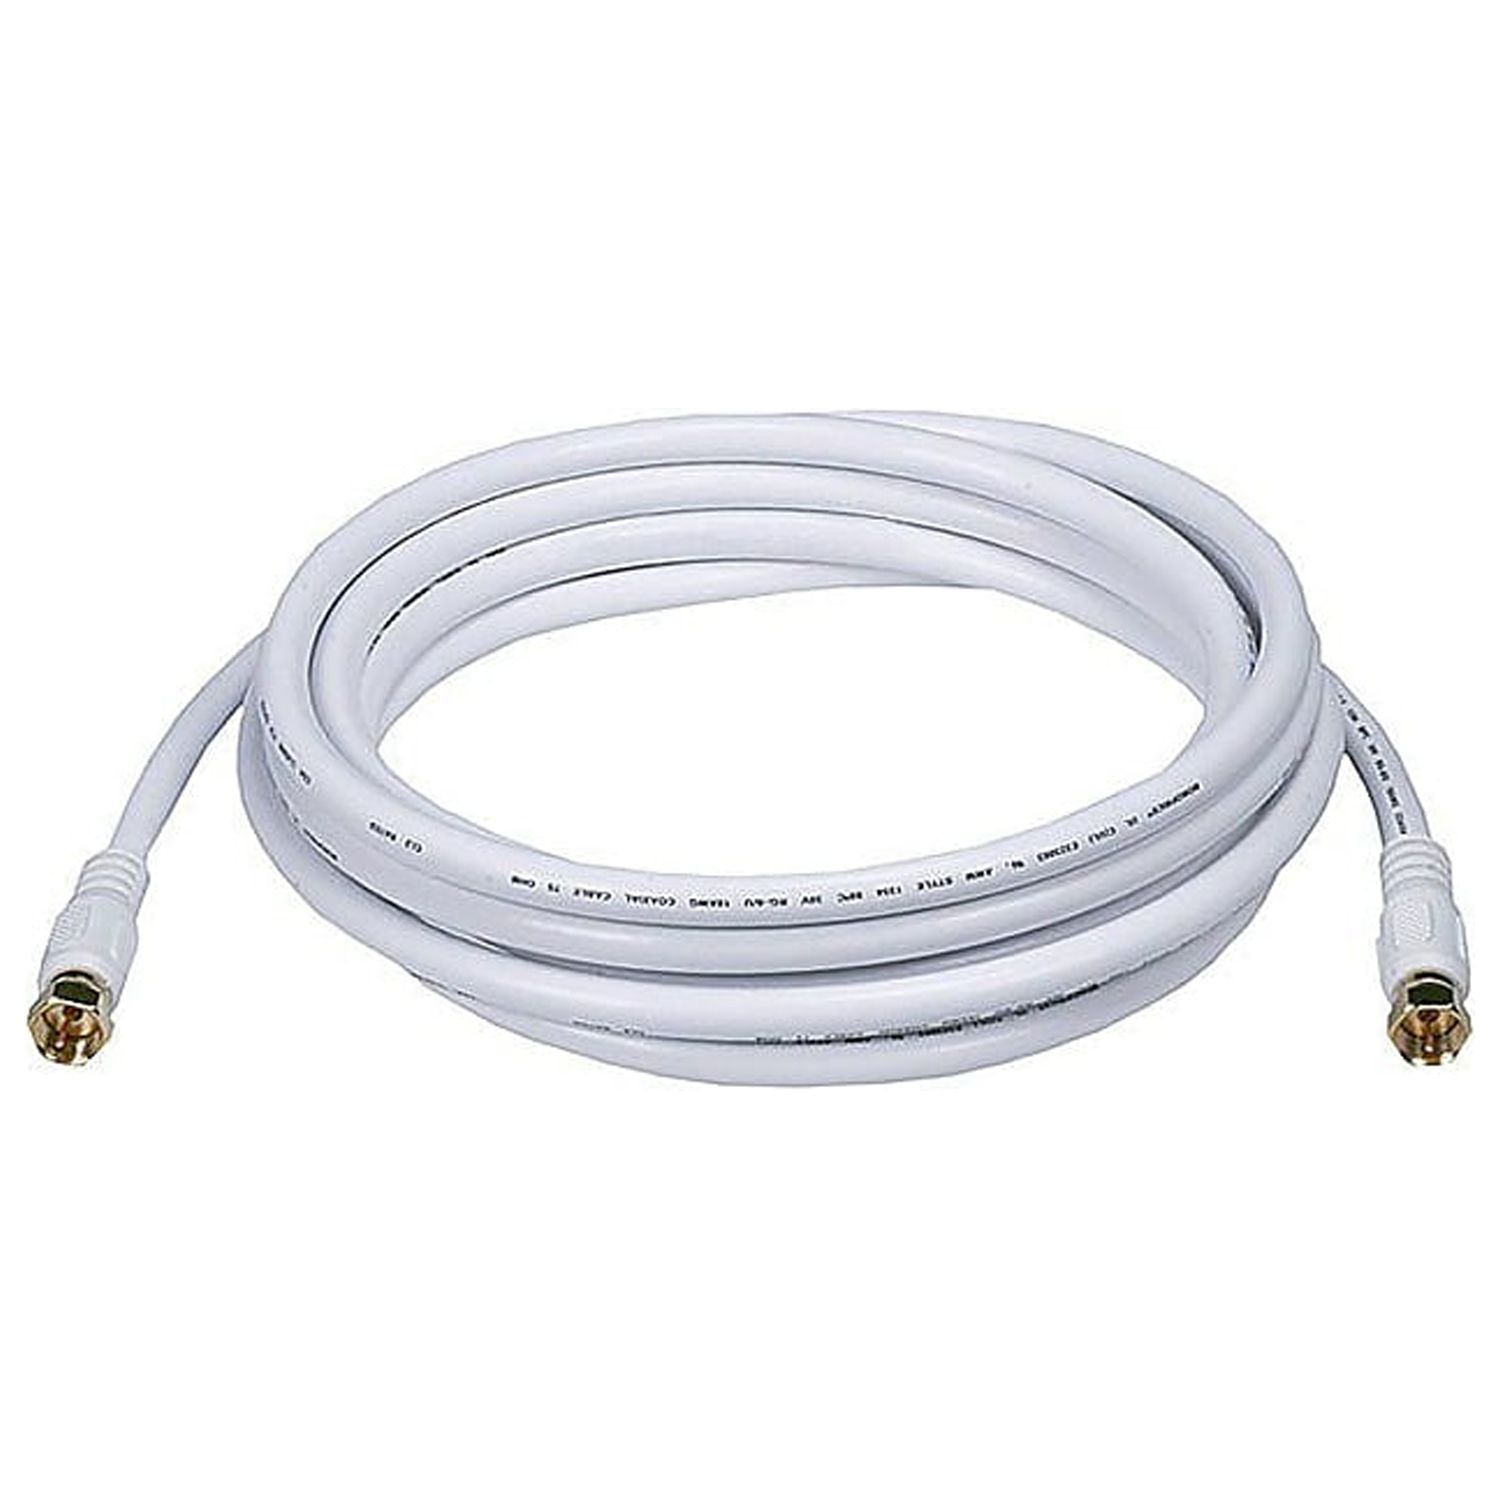 Monoprice 10' CL2 Quad Shielded RG6 F Type 18AWG Coaxial Cable White 106315 - image 1 of 2